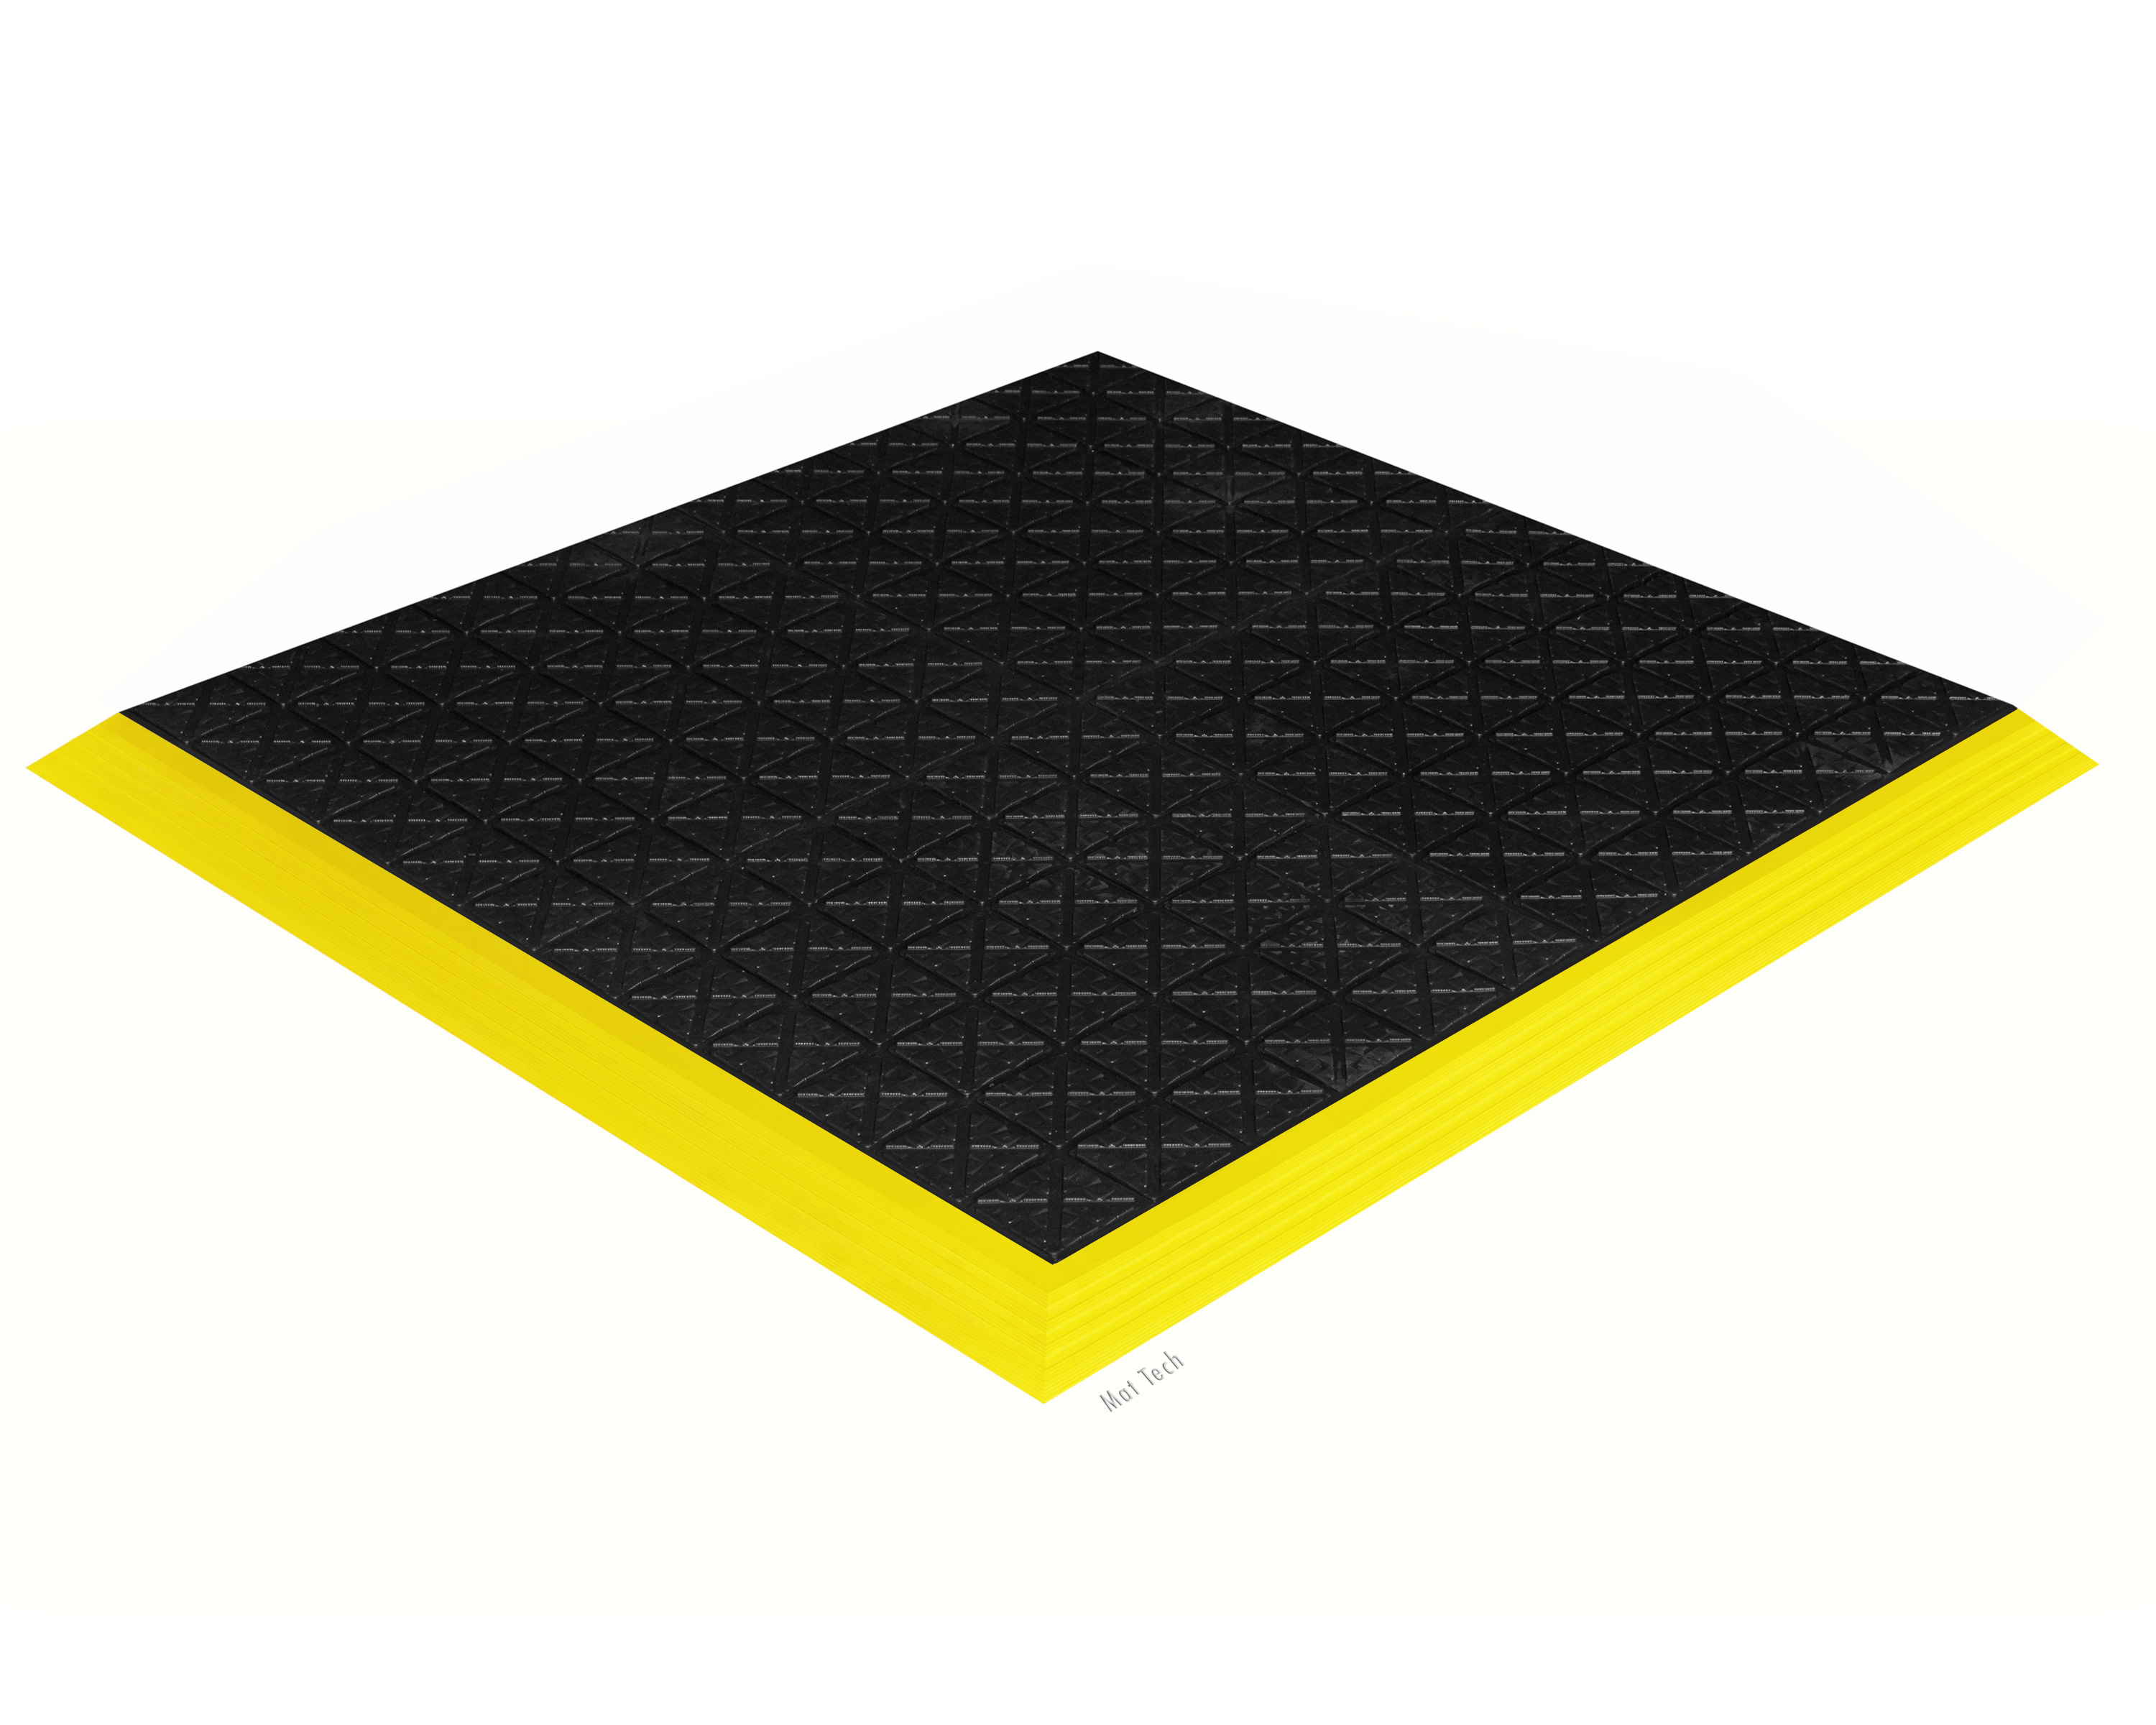 high-resmattech_ergo_x-treme_black_solid-top_surface_with_yellow_ramps